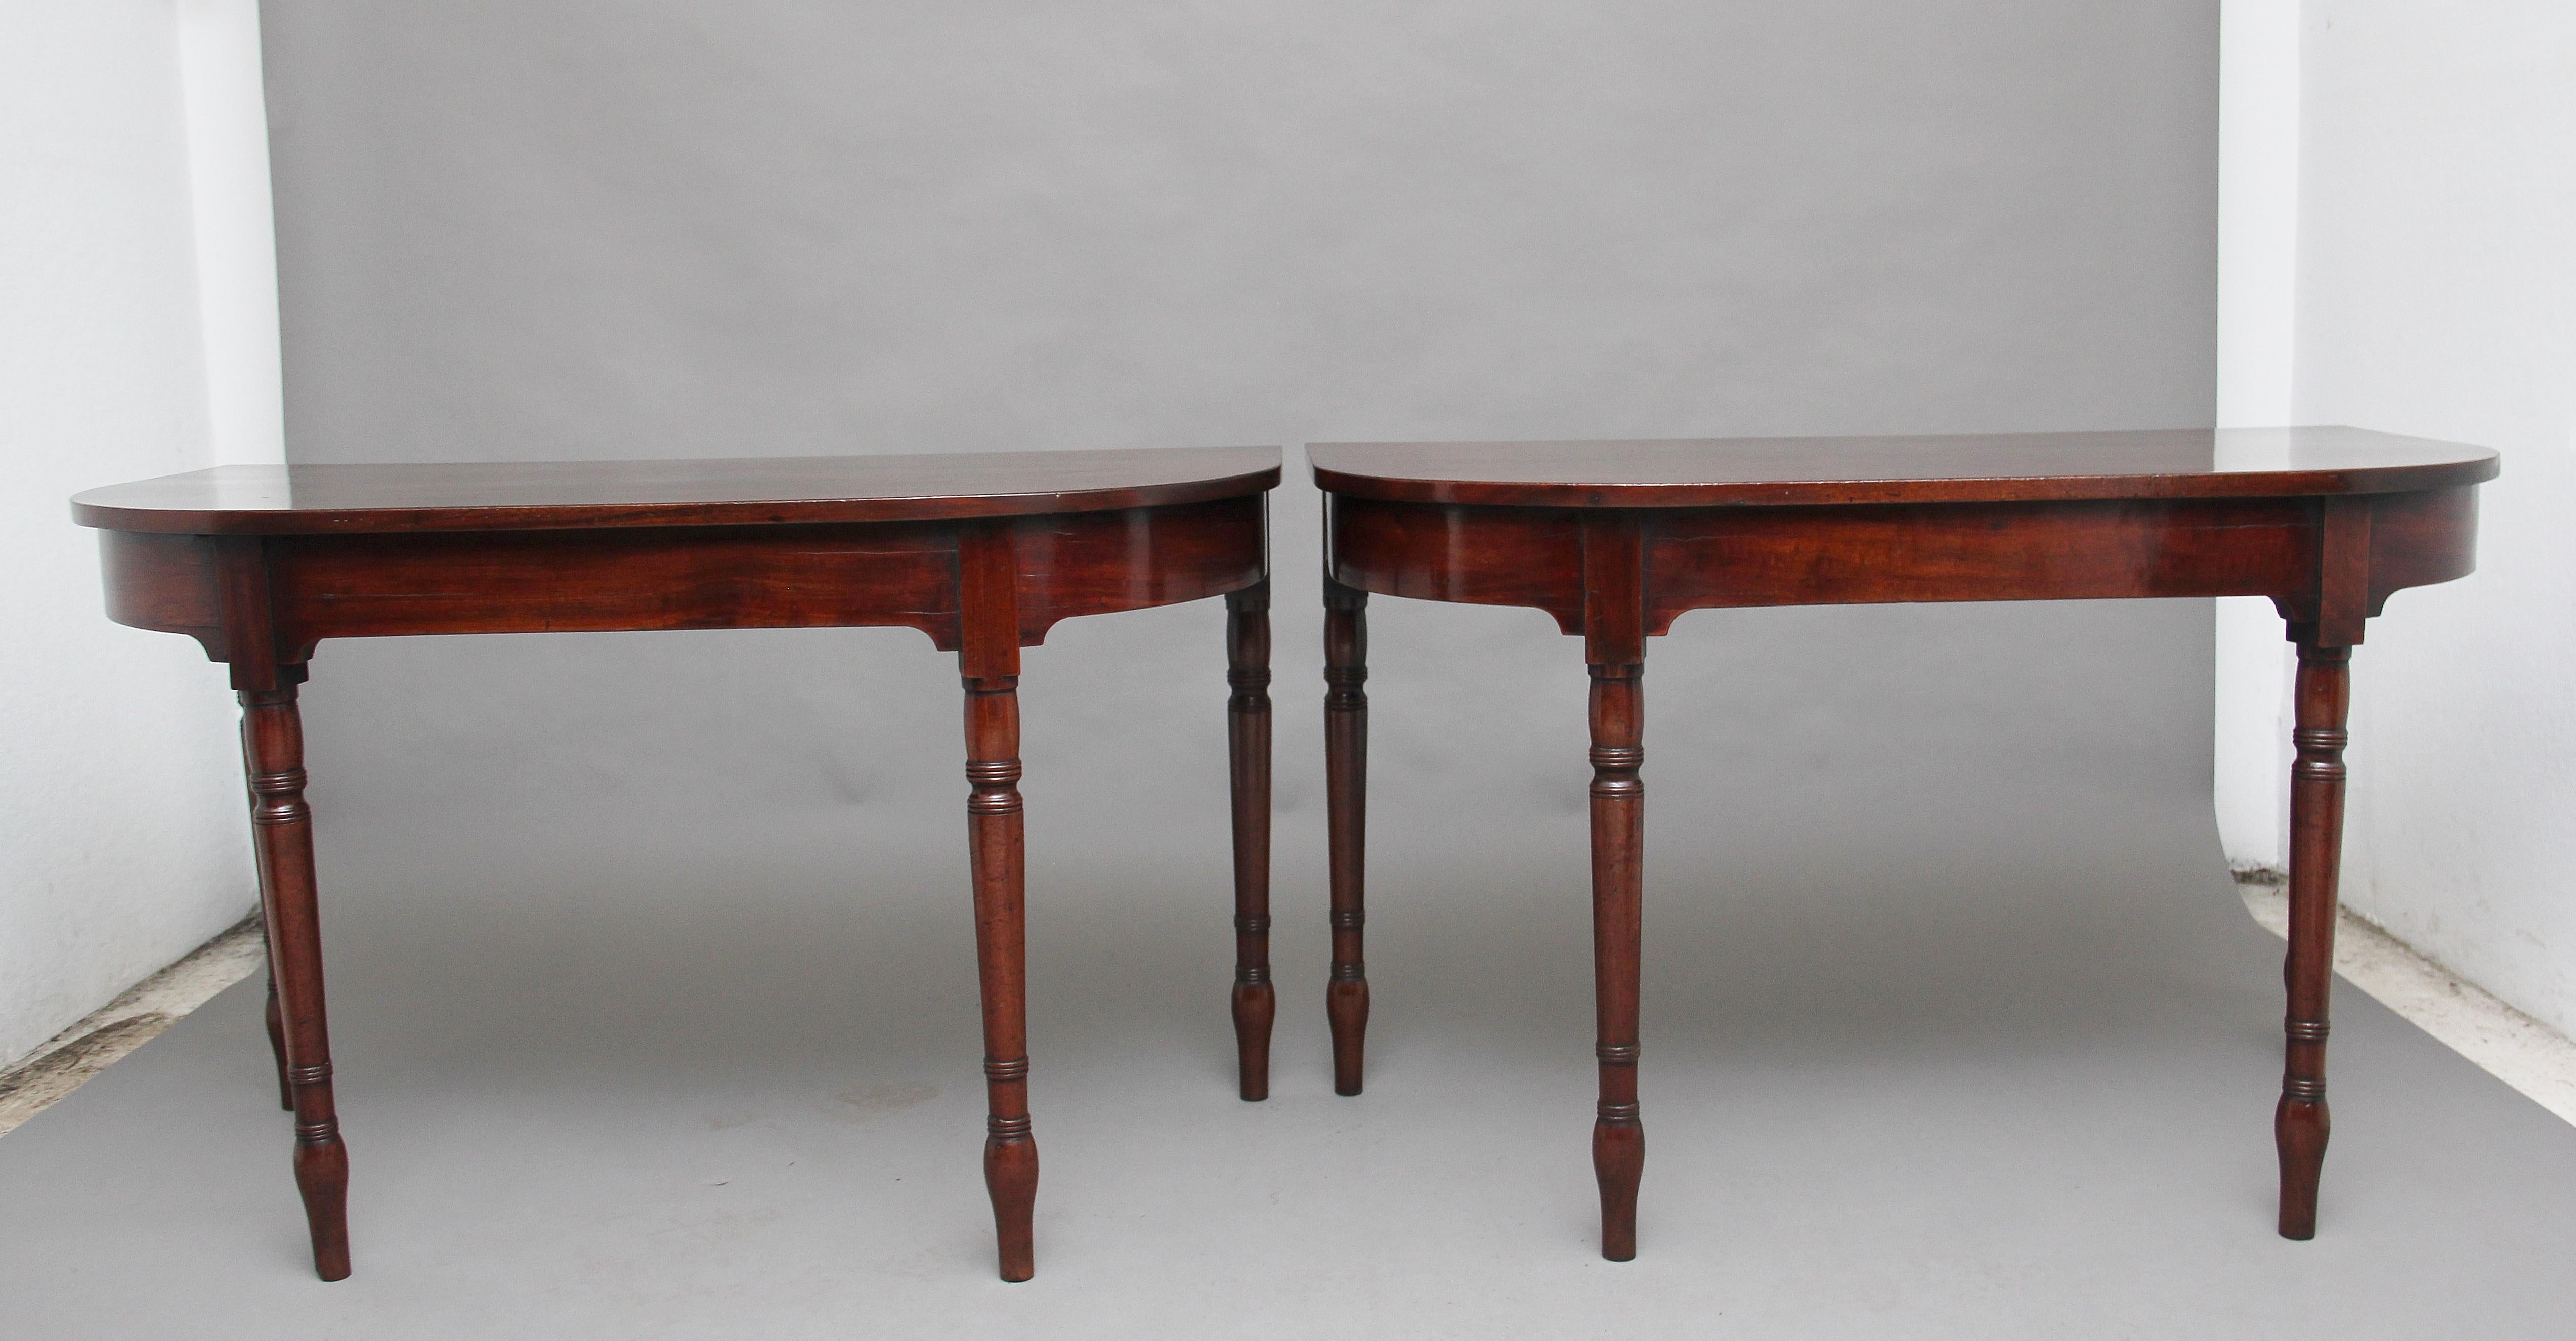 A pair of early 19th century mahogany console tables, the wonderfully figured demilune shaped top above a shaped apron, supported on elegant turned legs. The tables have a lovely nice warm rich mahogany color and both are in excellent condition,